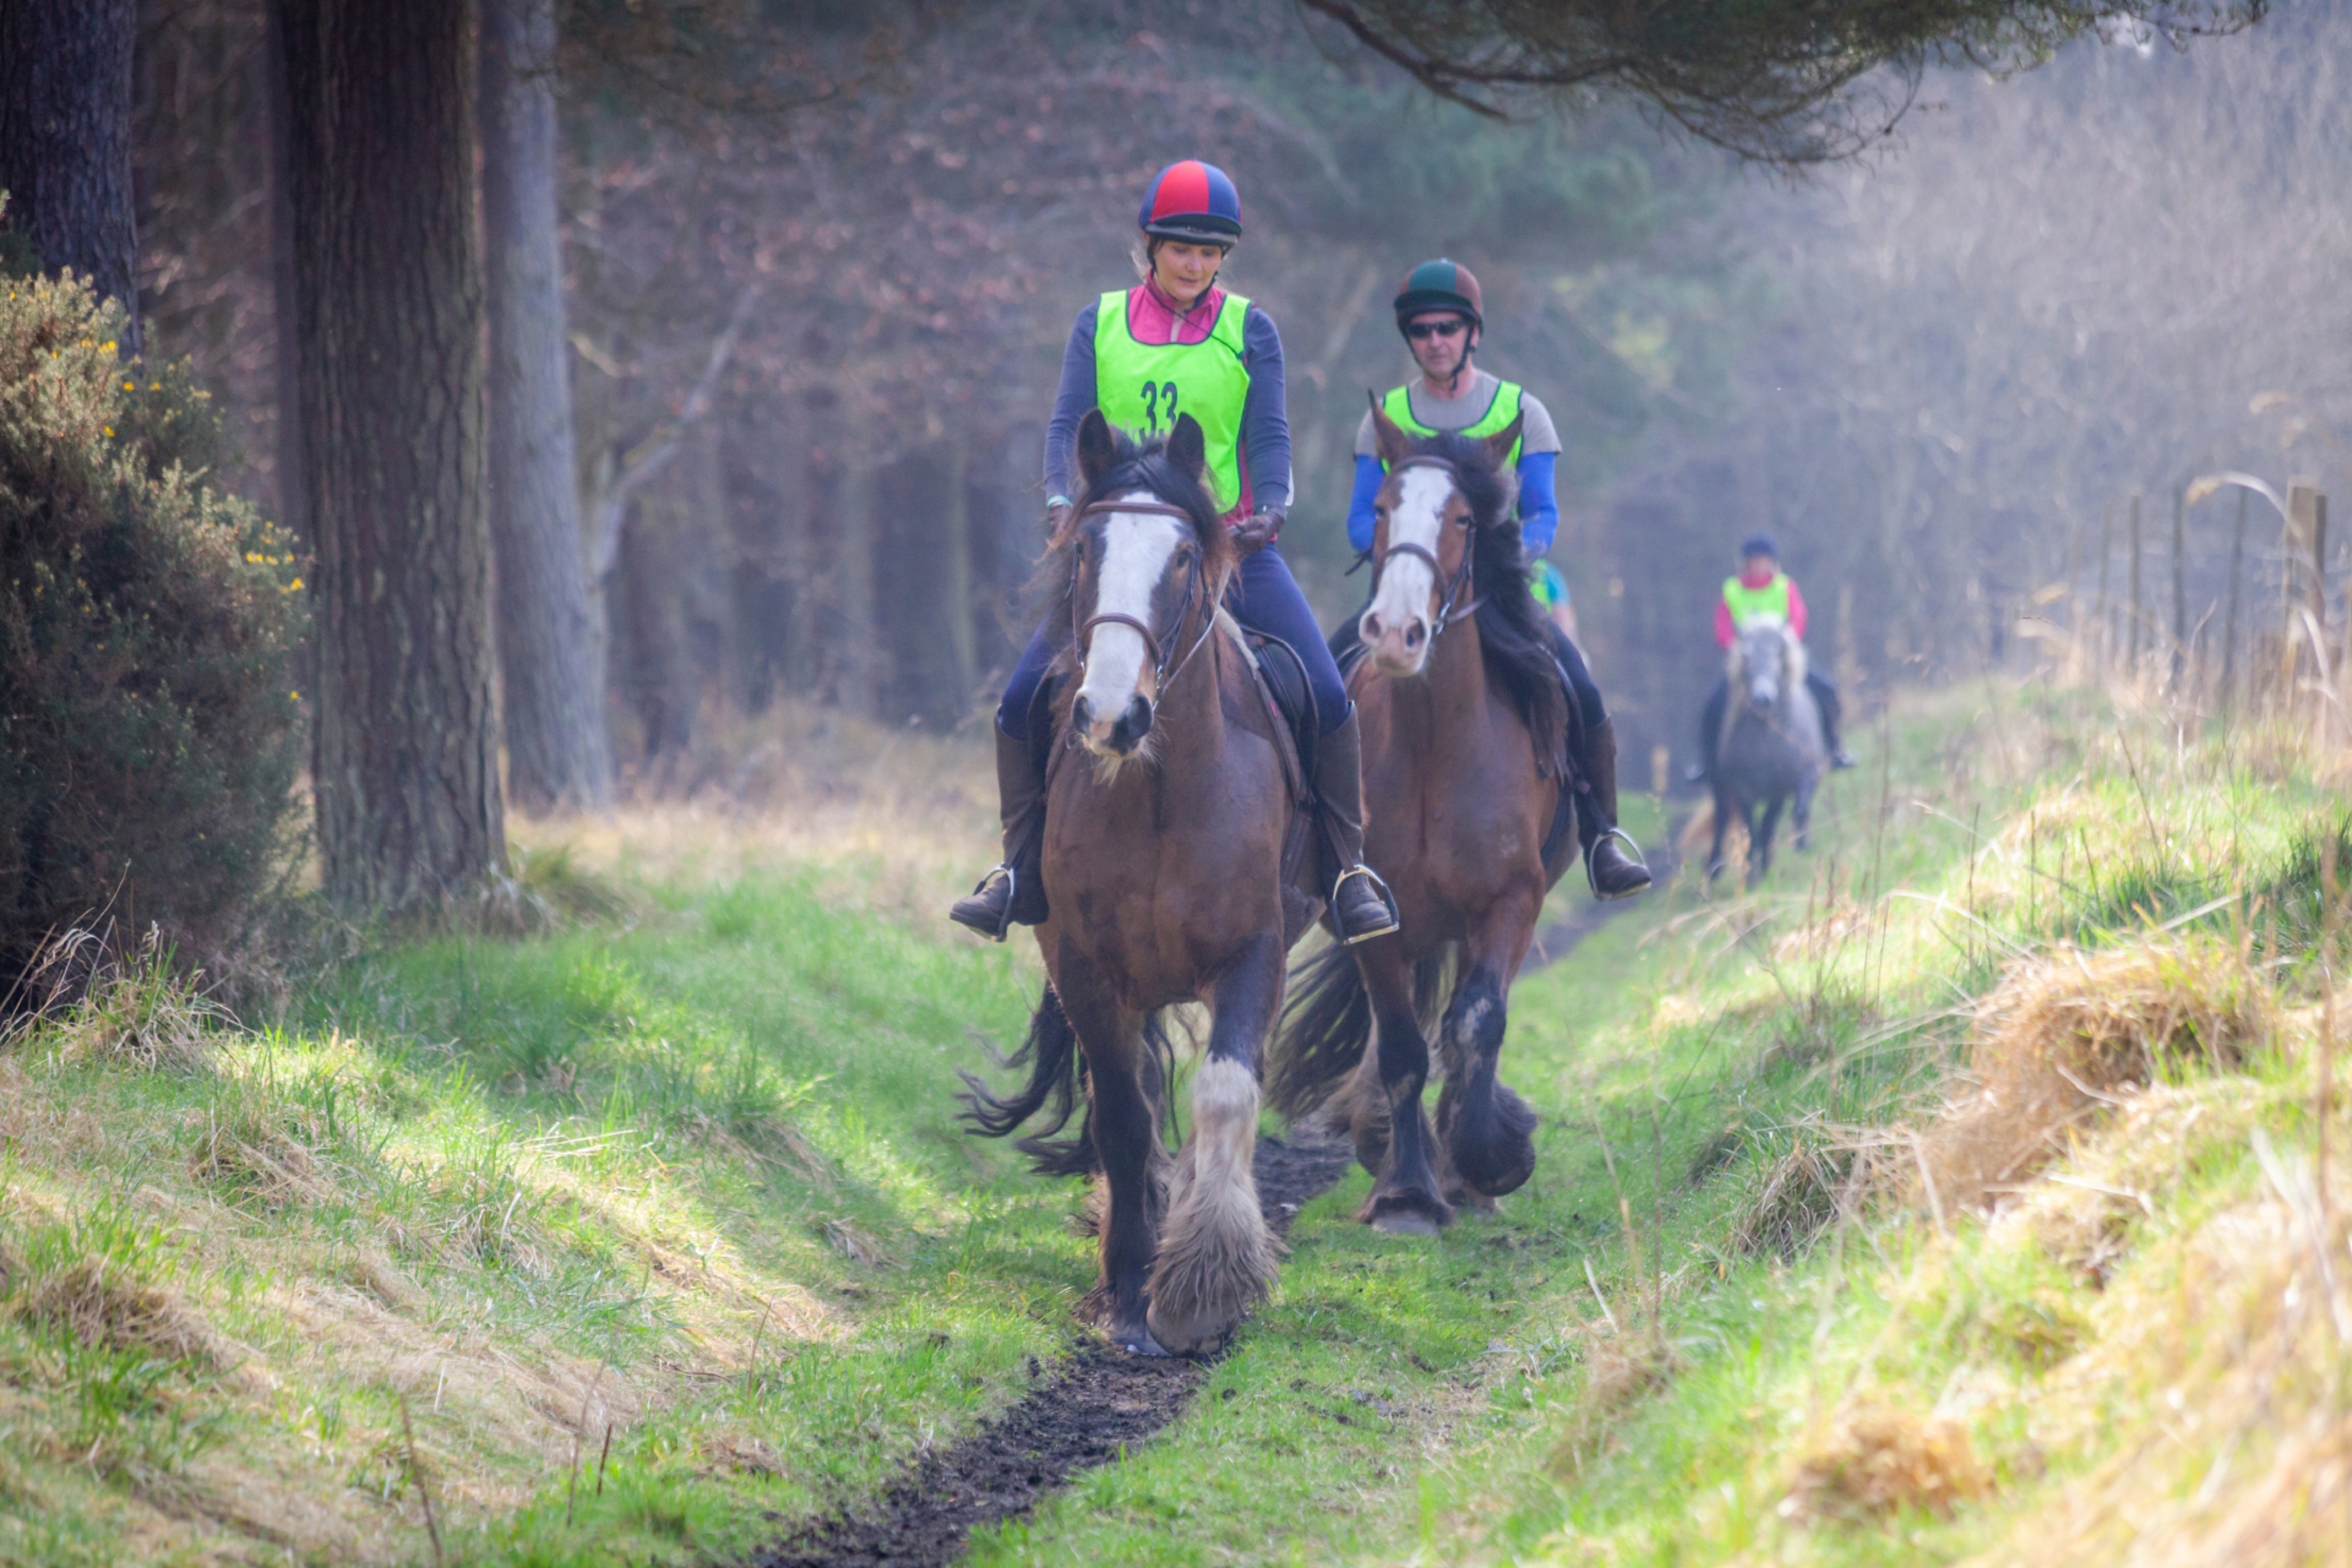 Caroline and Richard Gray take part in an endurance ride at Tentsmuir on their stunning Clydesdales, Higgins and Strathorn Linn.